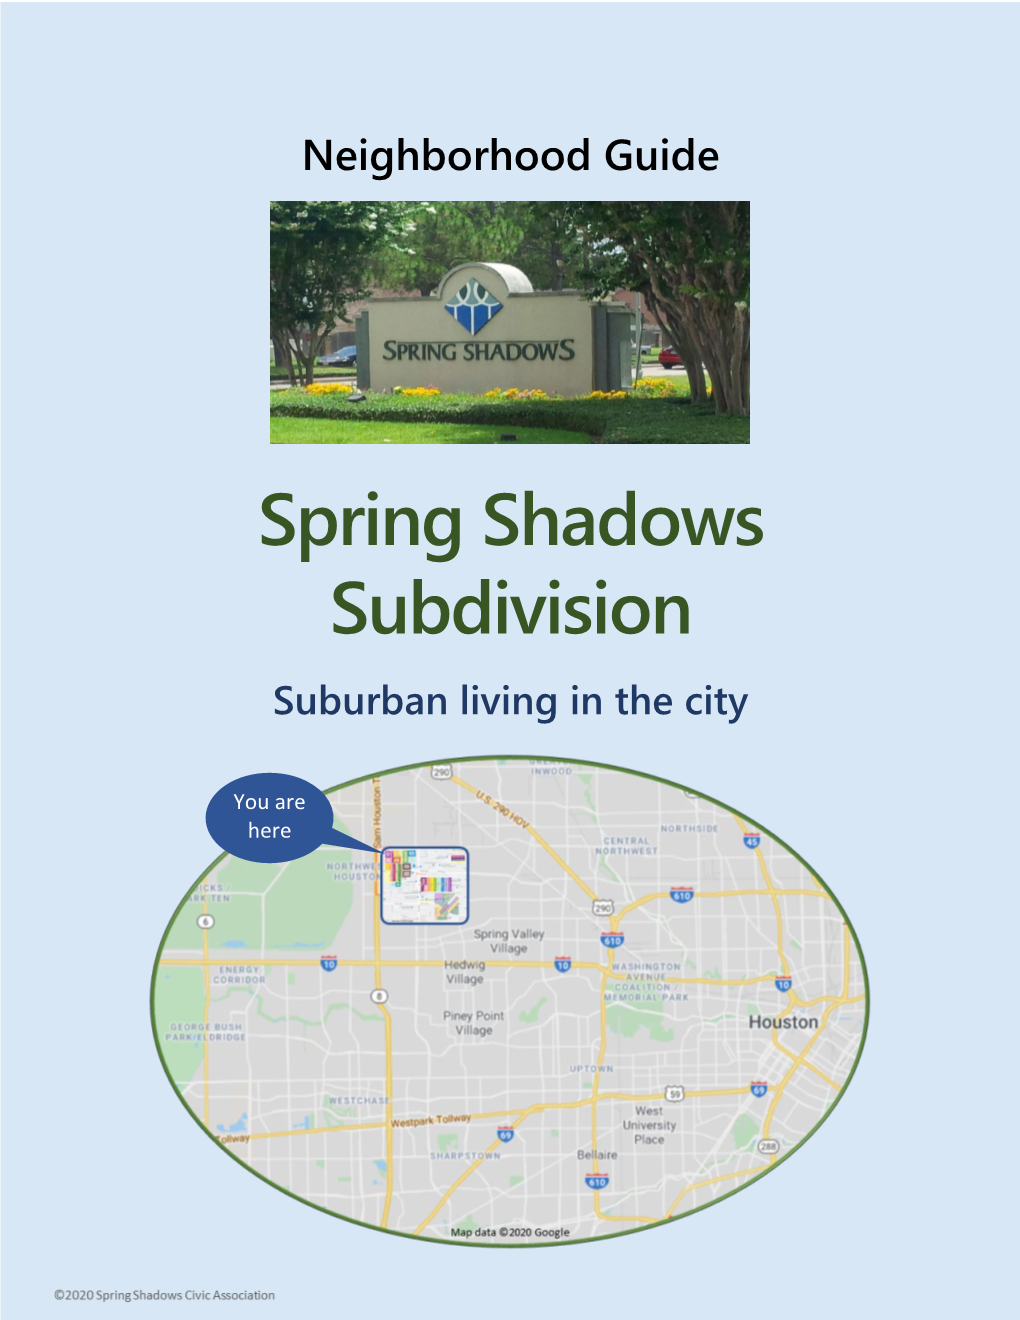 Spring Shadows Subdivision Suburban Living in the City